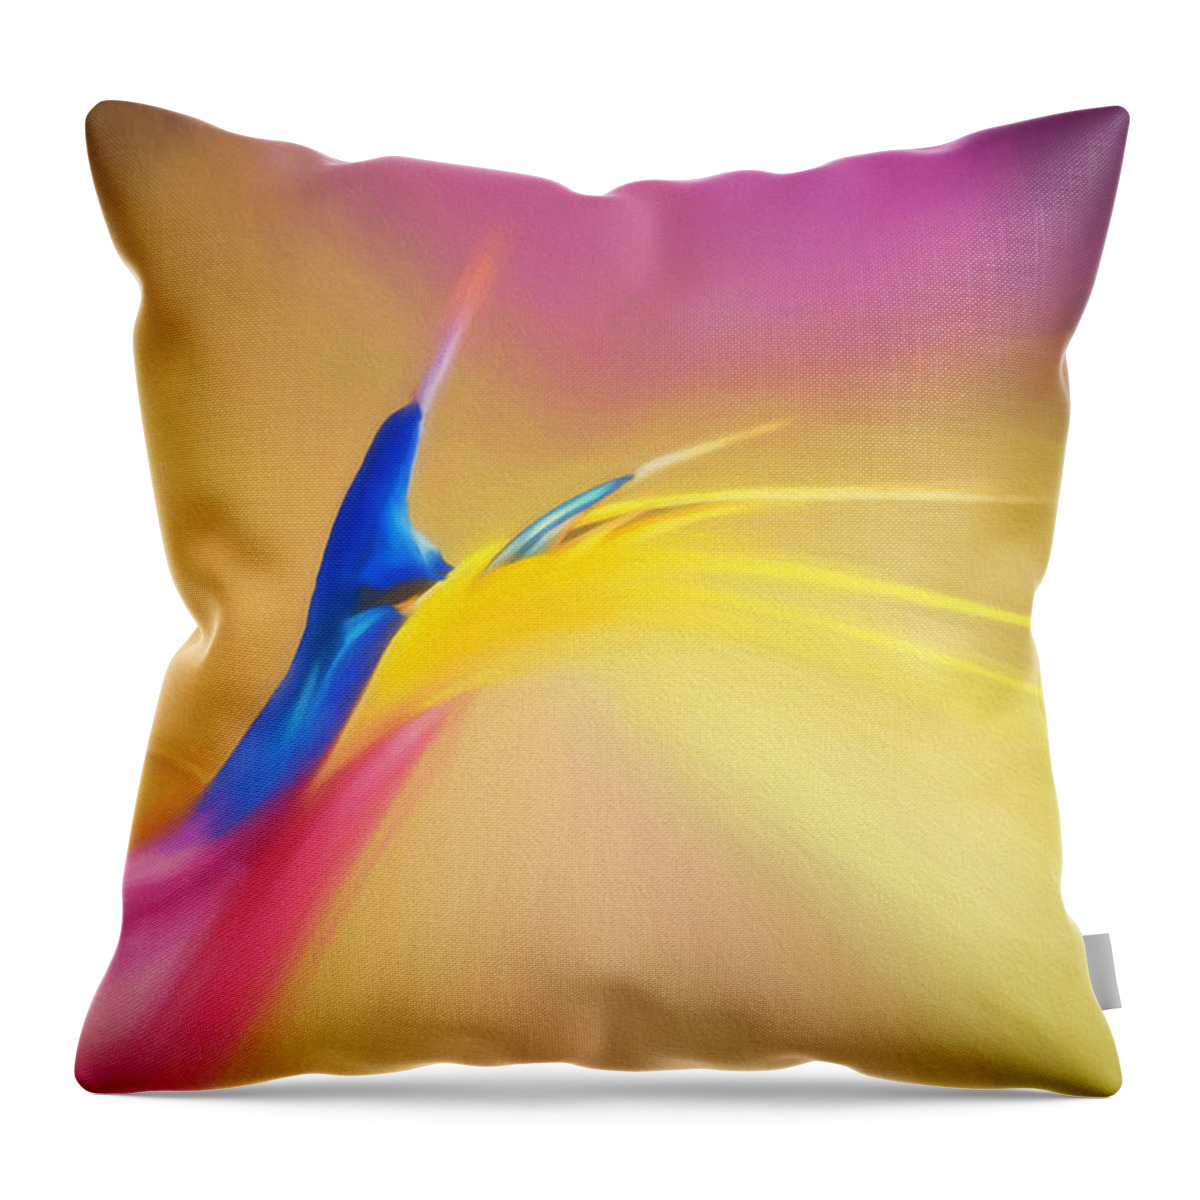 Background Throw Pillow featuring the photograph Patchy Colors by Maria Coulson